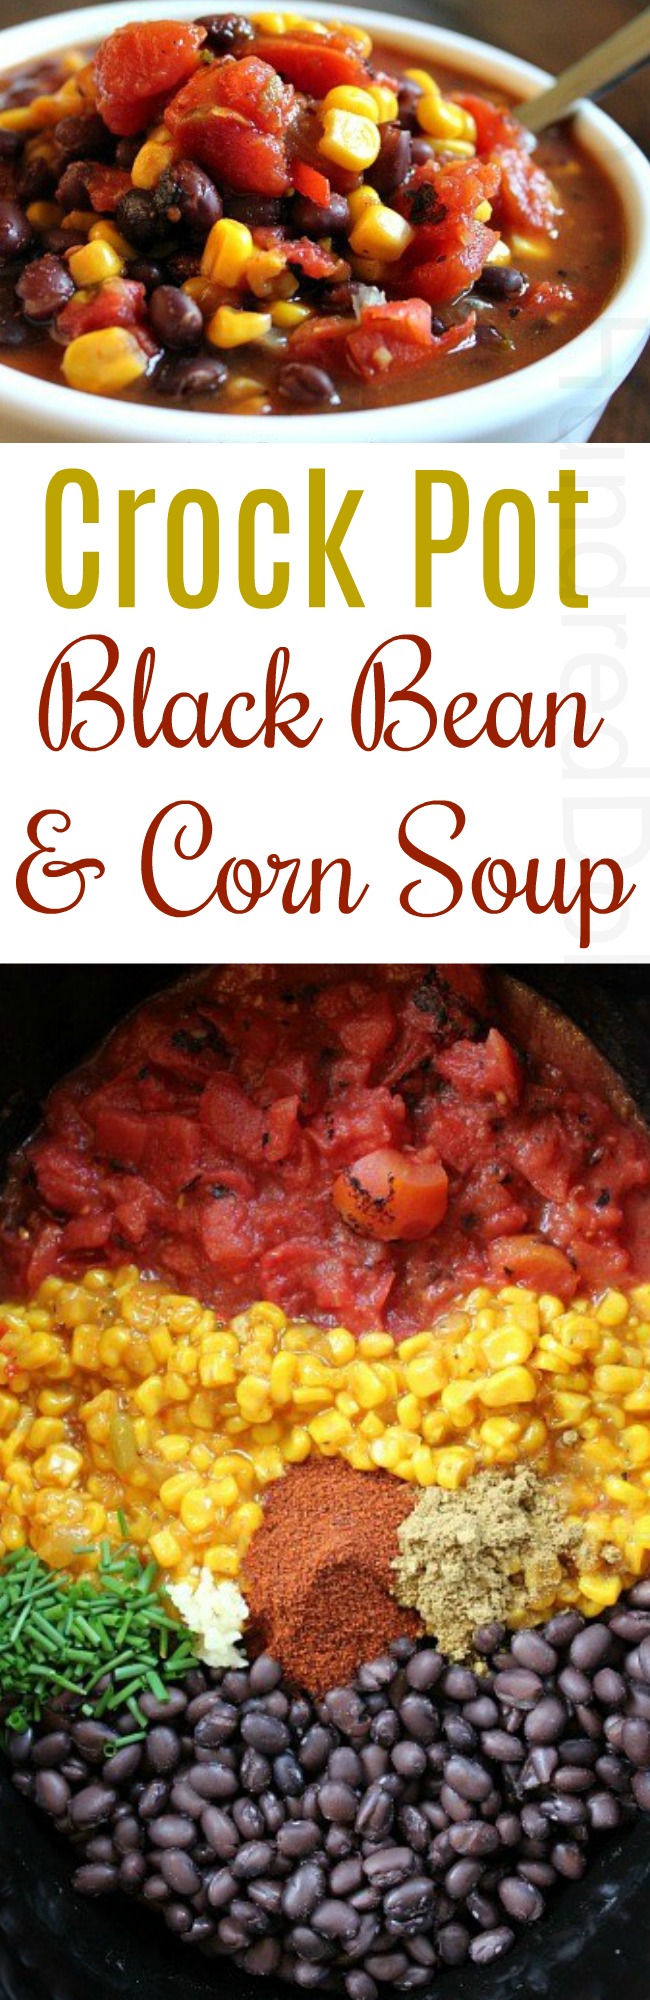 Easy Slow Cooker Recipes – Black Bean and Corn Soup